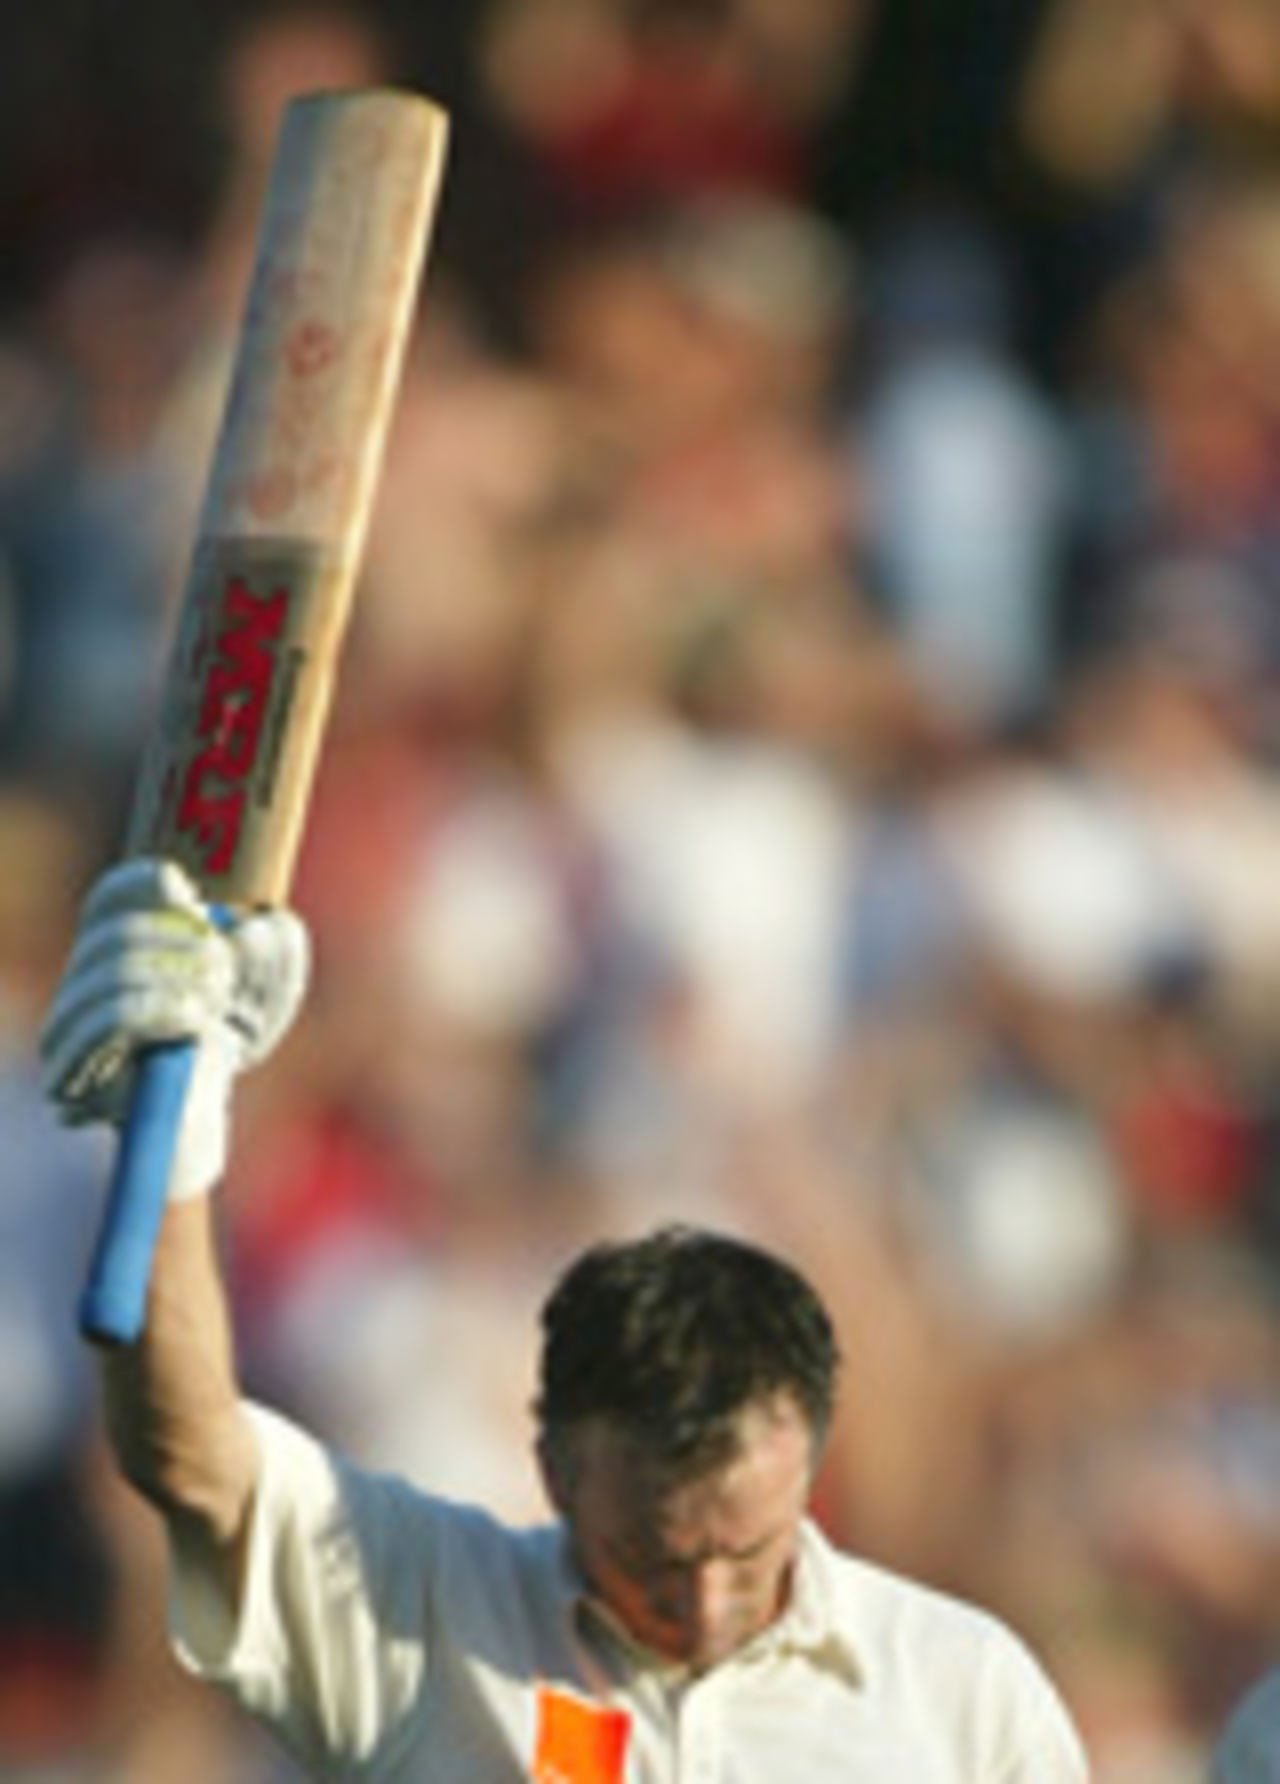 Steve Waugh acknowledges applause for his century against England at Sydney, 3 January, 2003